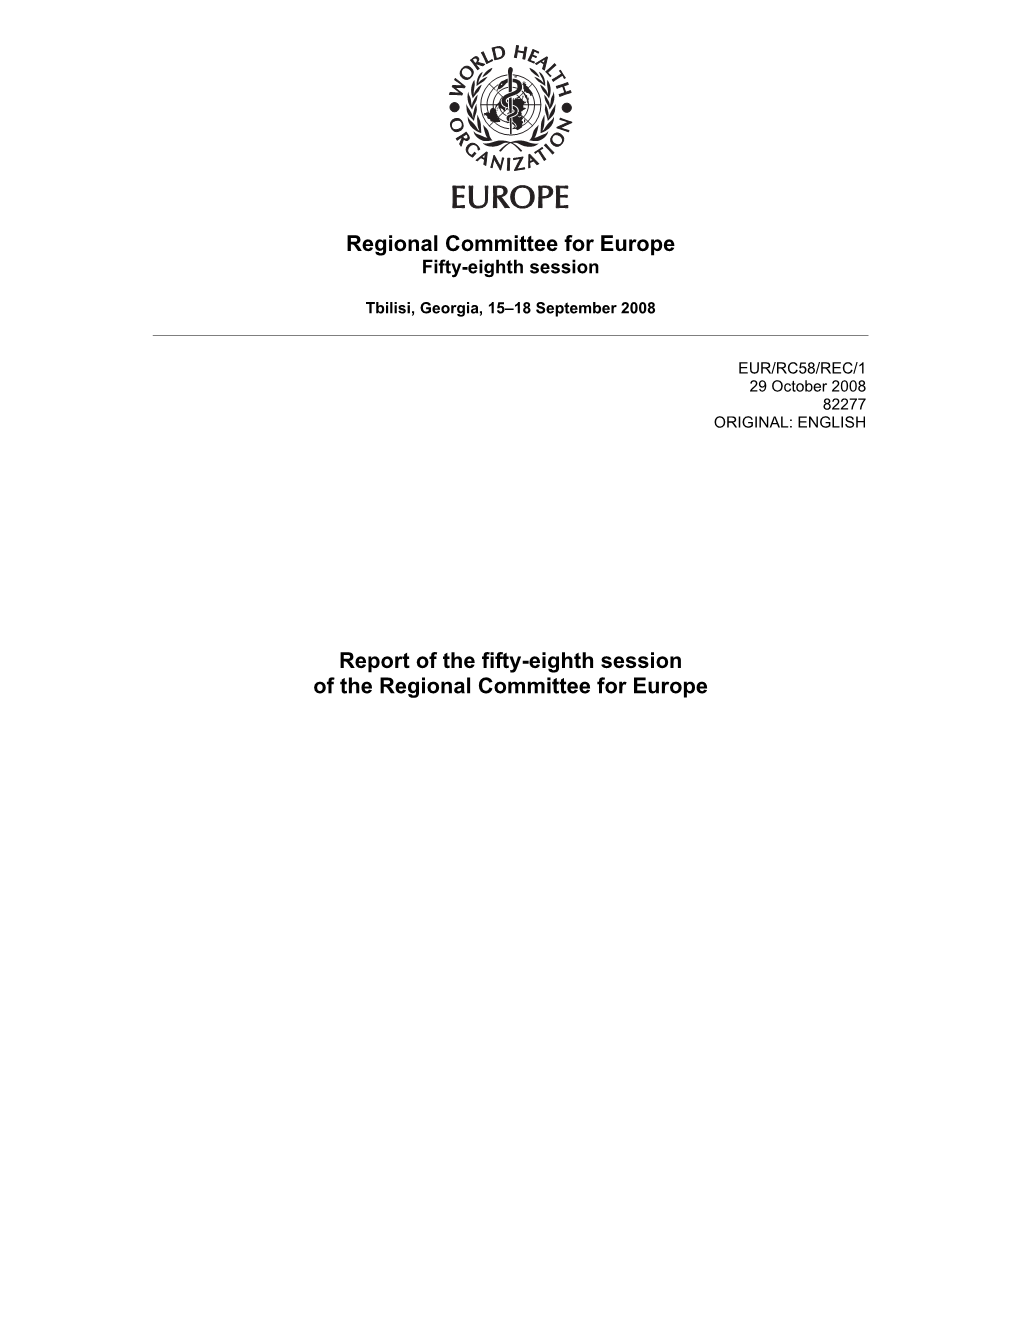 Report of the Fifty-Eighth Session of the Regional Committee for Europe